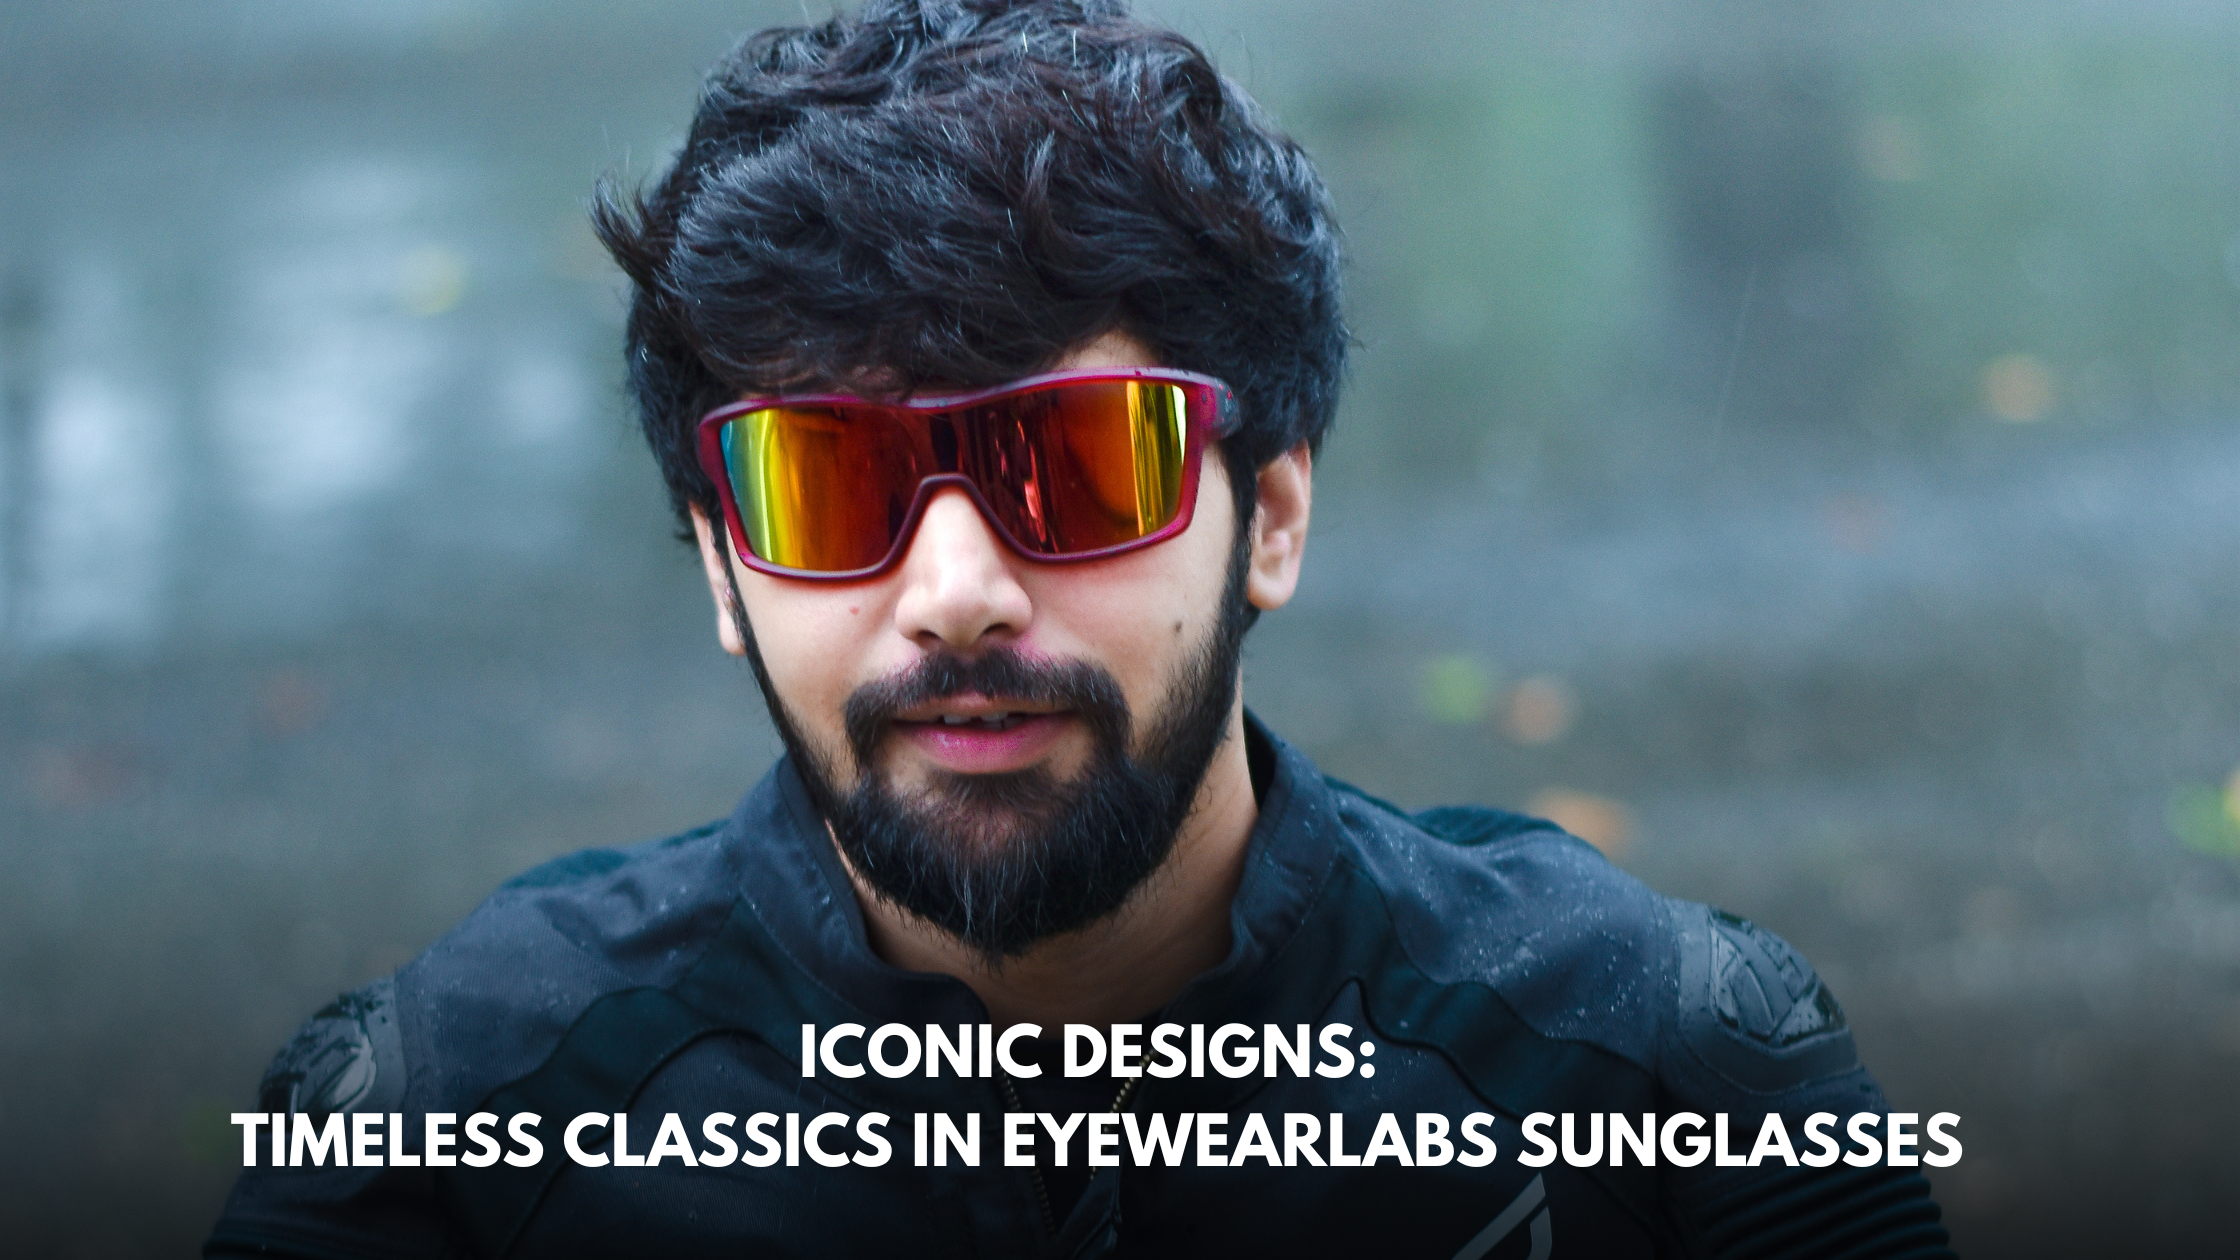 Iconic Designs: Timeless Classics in Eyewearlabs Sunglasses